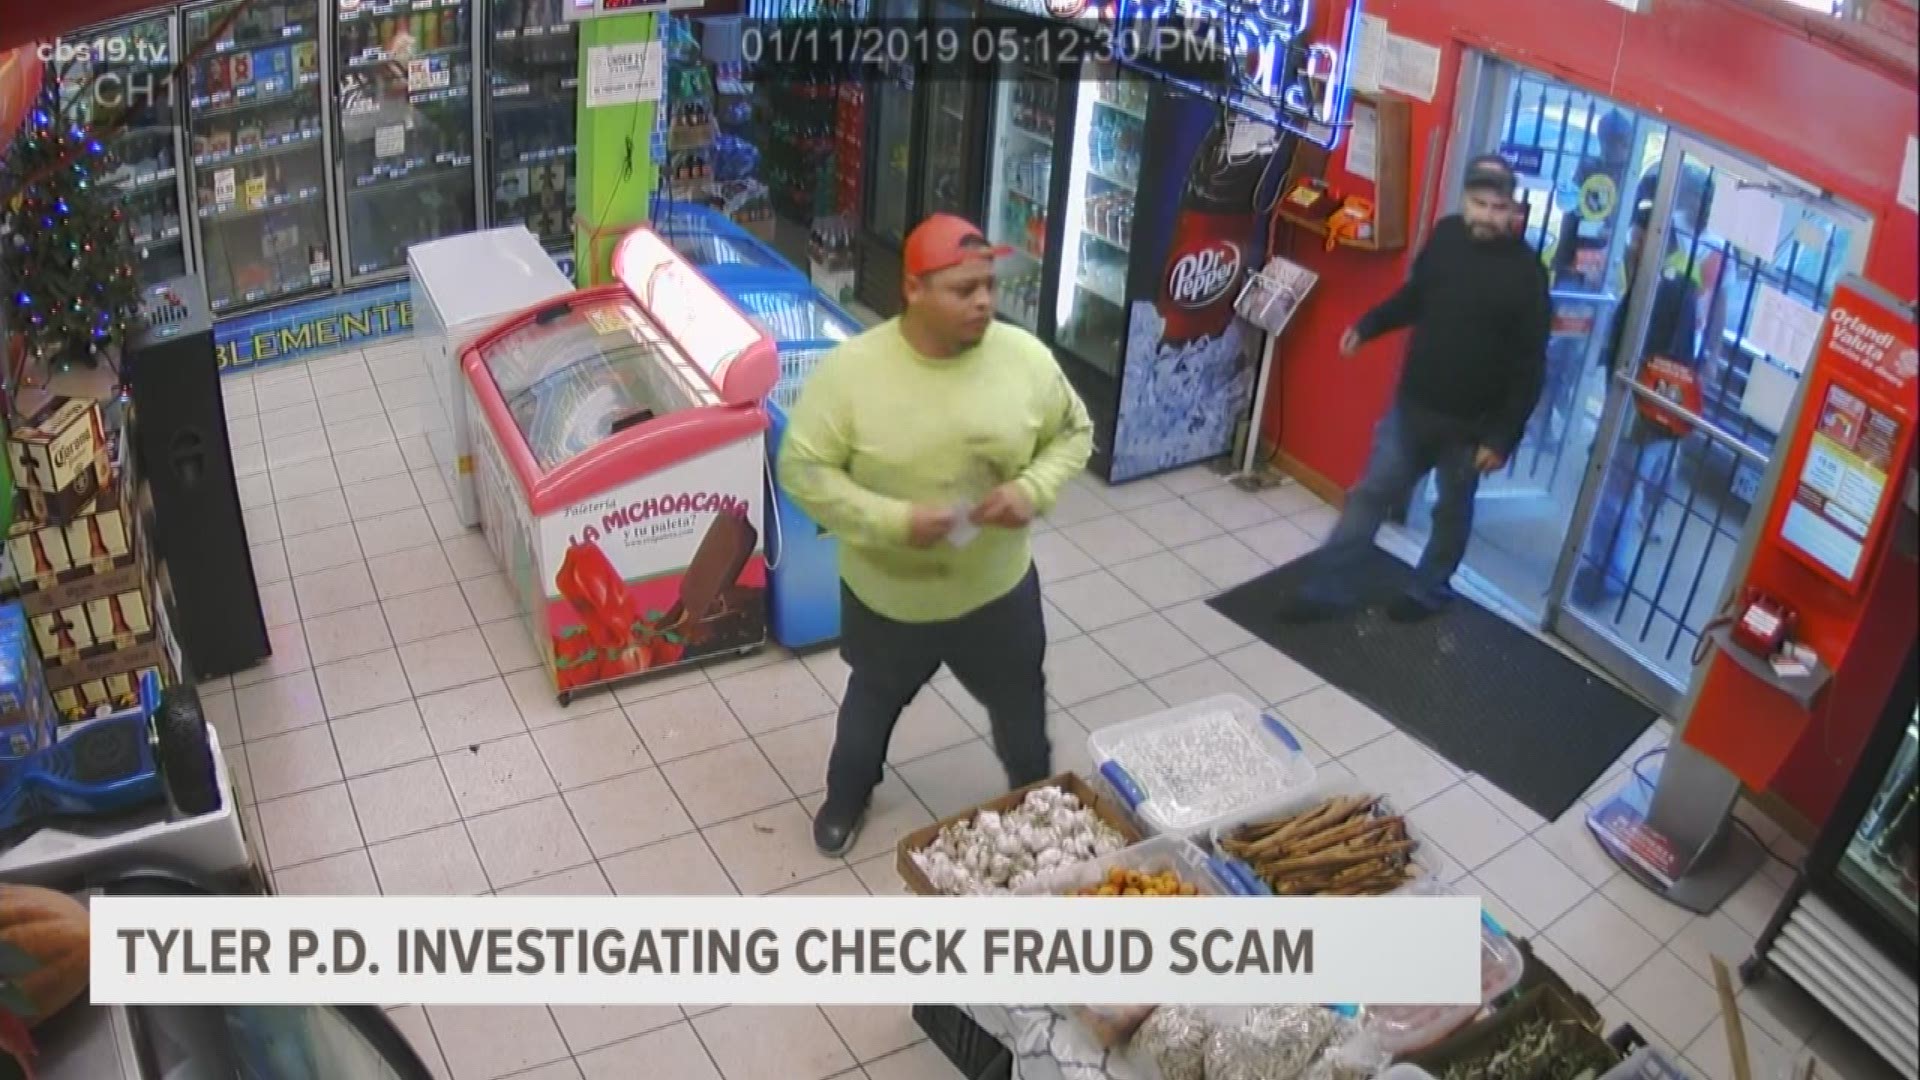 CBS19's Tim Wolf obtained this security camera video from the El Puente Market in Tyler, where they were able to avoid falling prey to a check fraud scam.